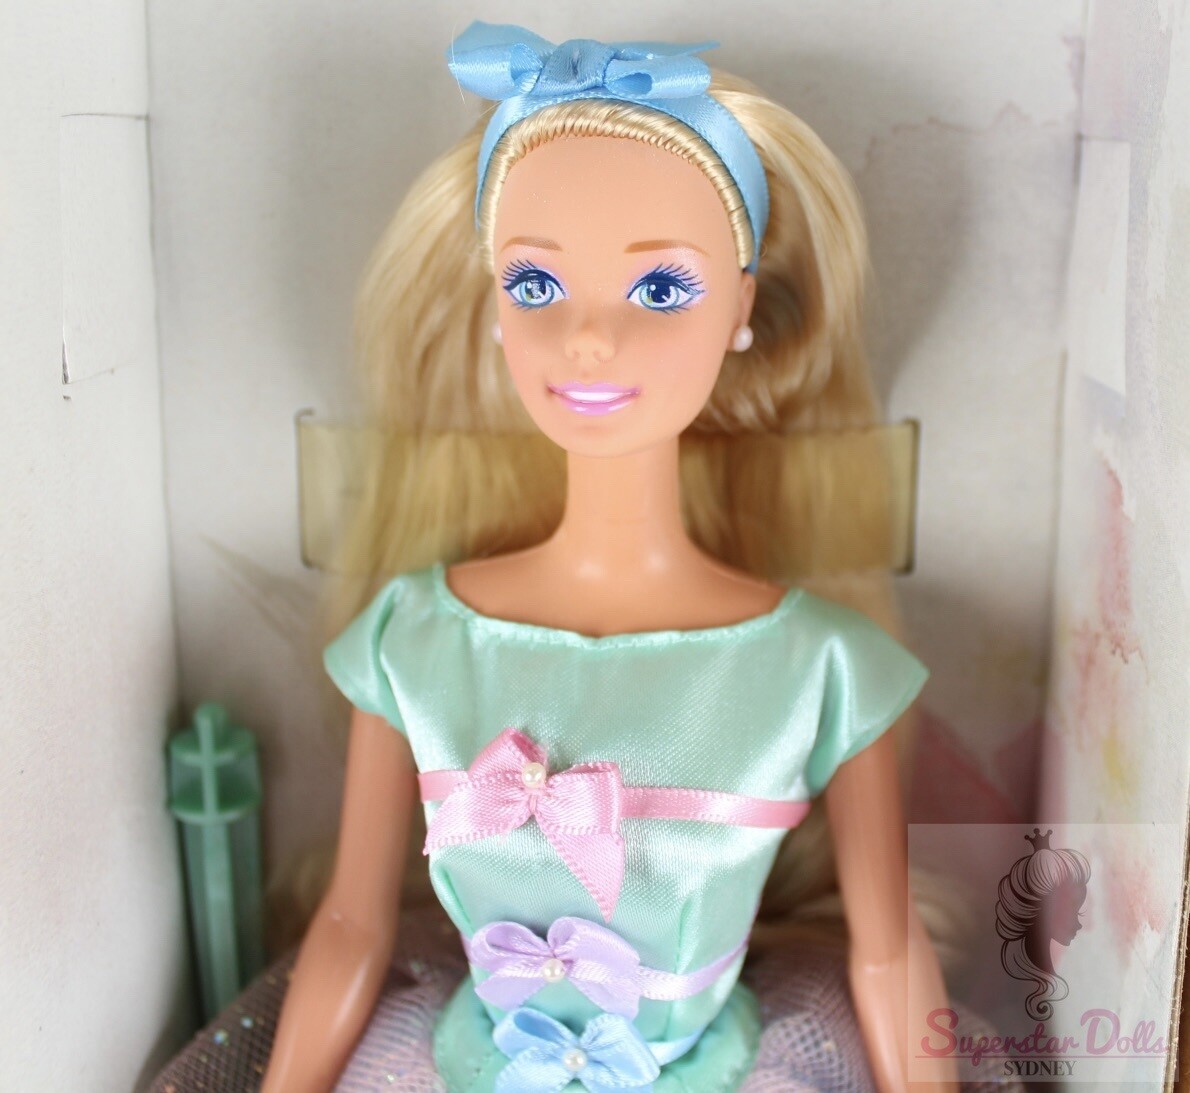 1997 Special Edition: Avon Spring Tea Party Barbie Doll